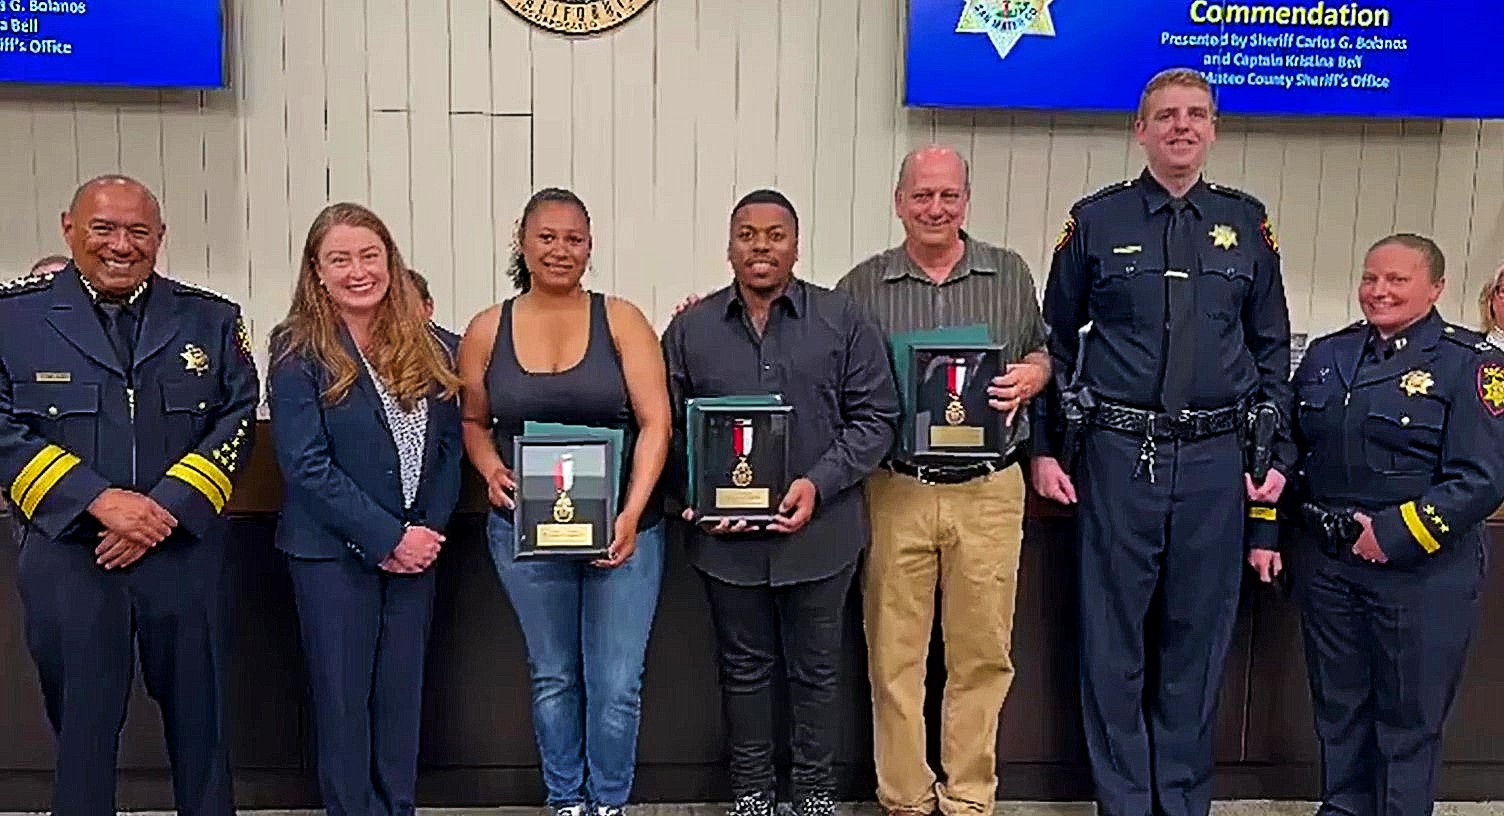 Heroes honored for pulling victims from burning car in San Carlos